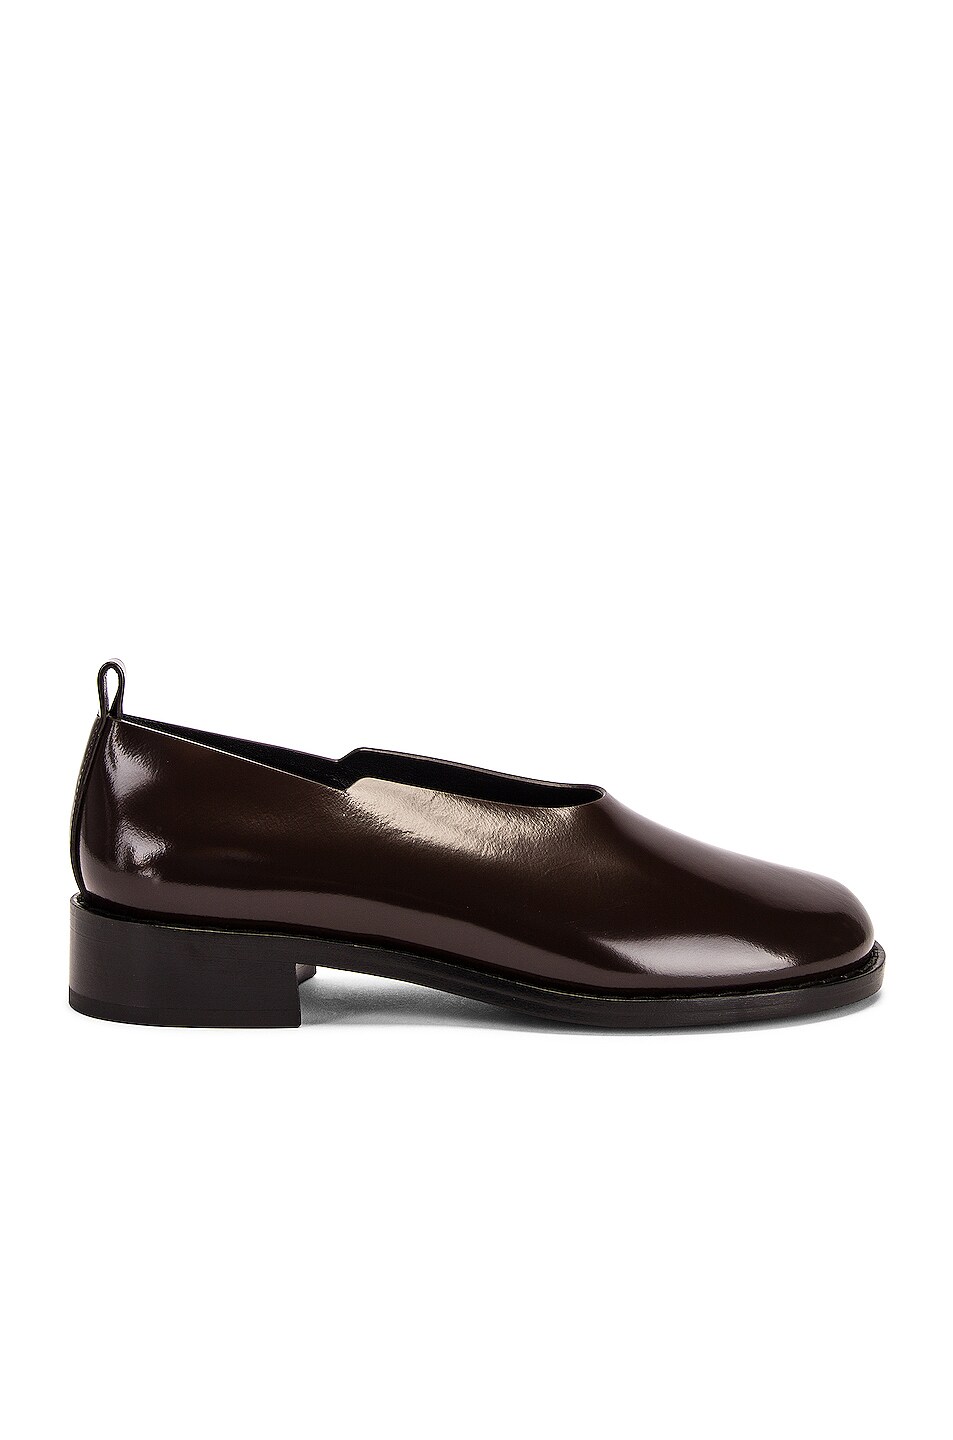 Image 1 of The Row Monceau Loafers in Coffee